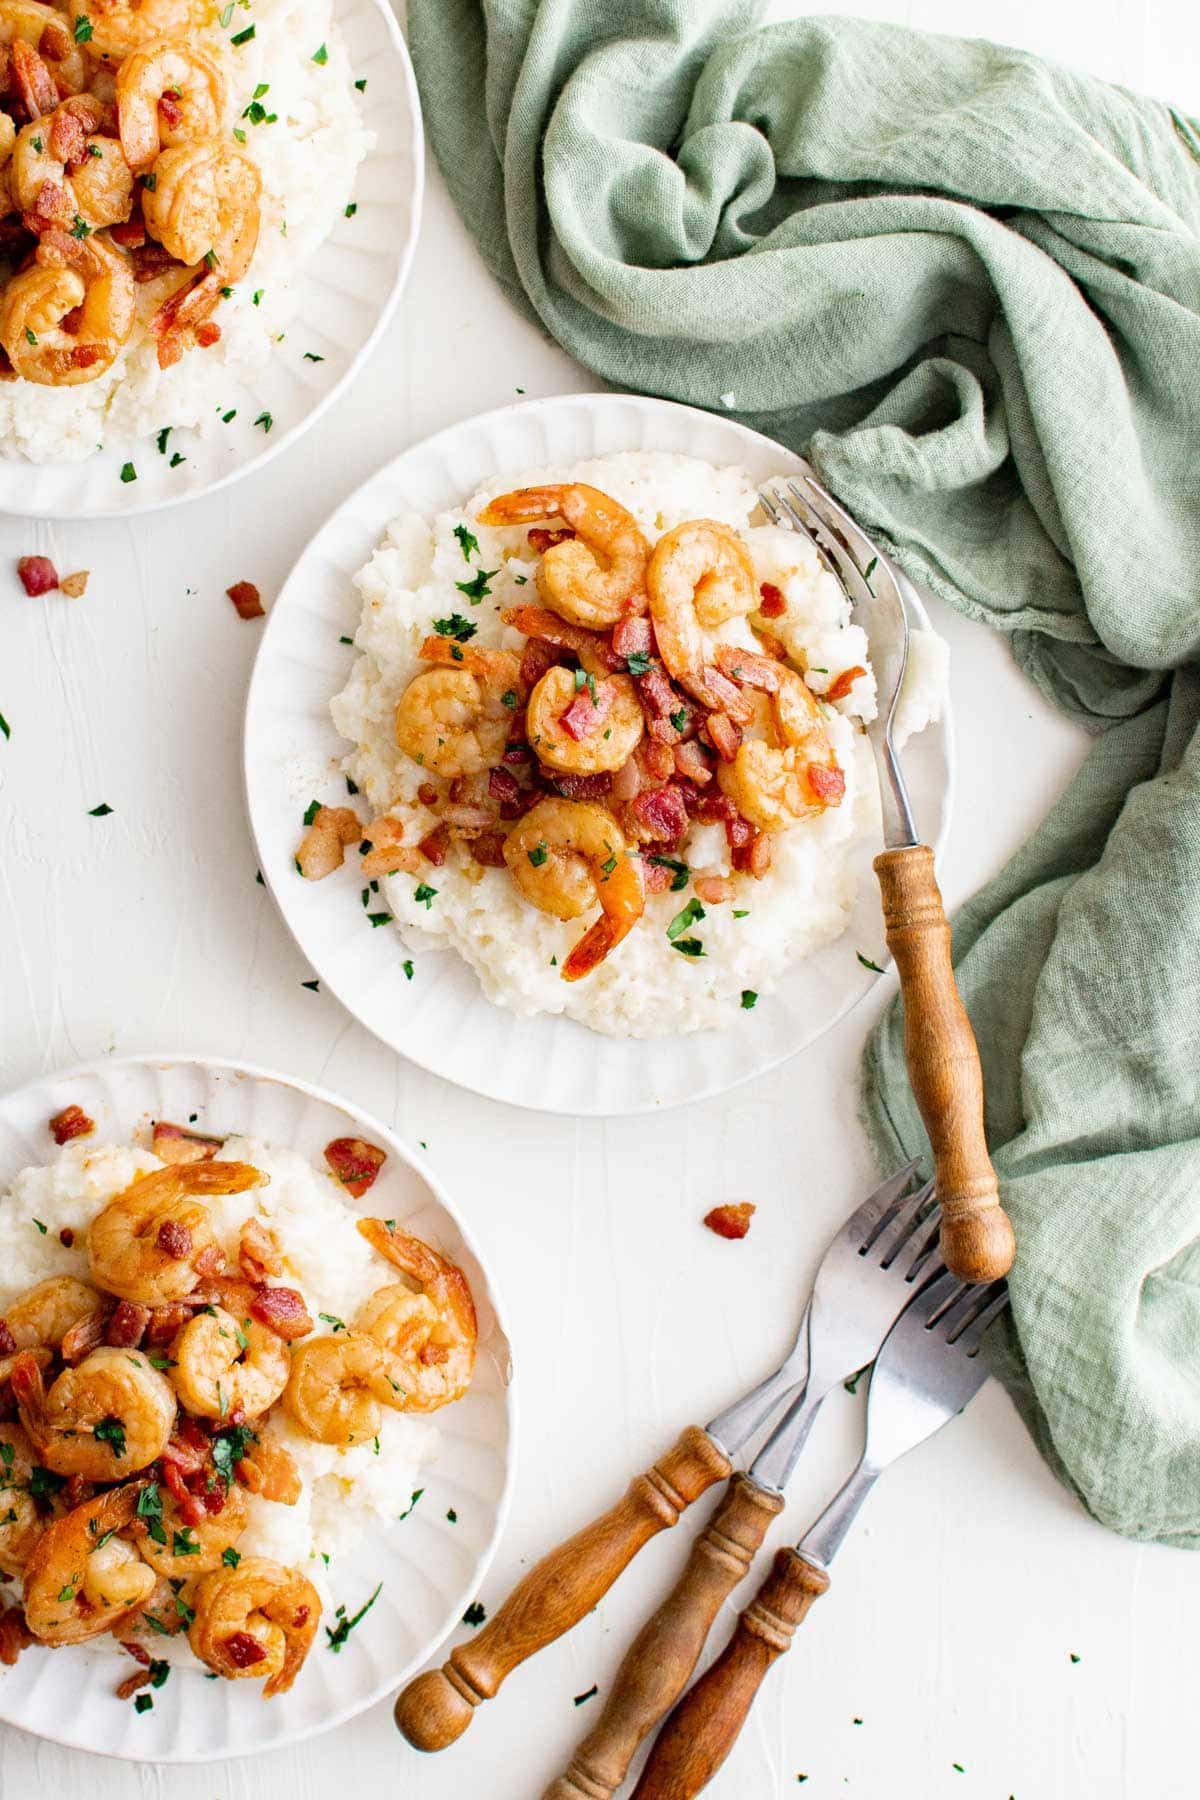 Southern Style Shrimp and Grits | YellowBlissRoad.com